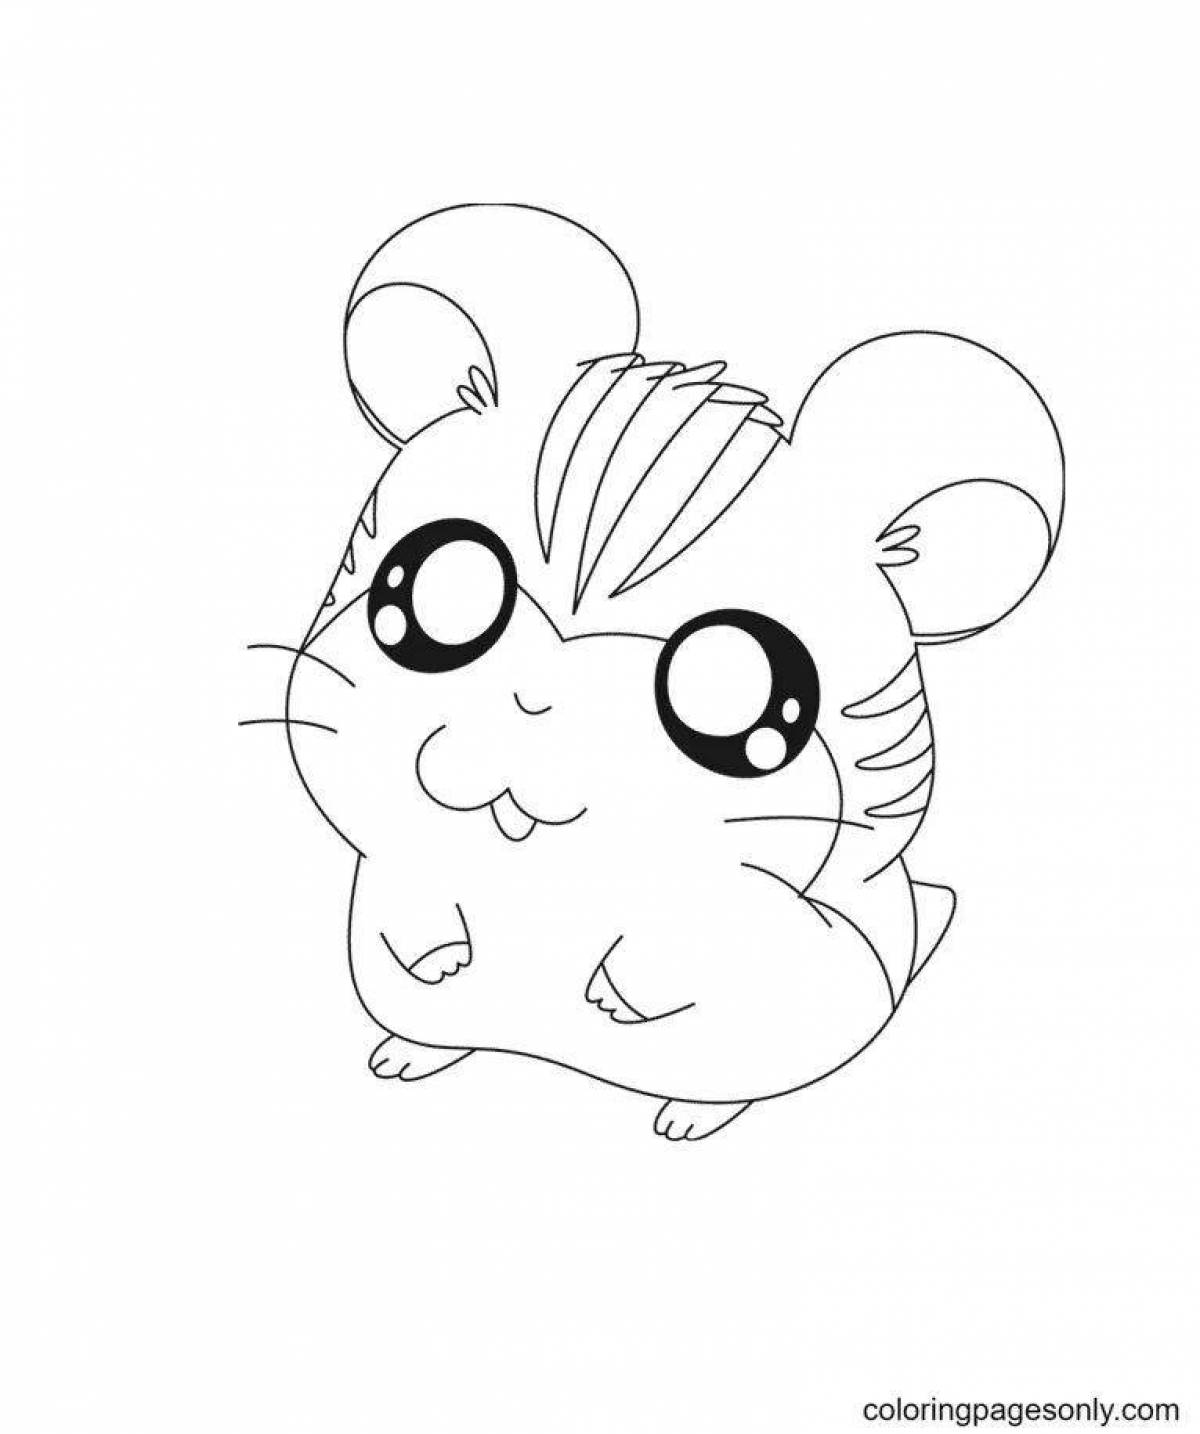 Fun coloring games with hamsters